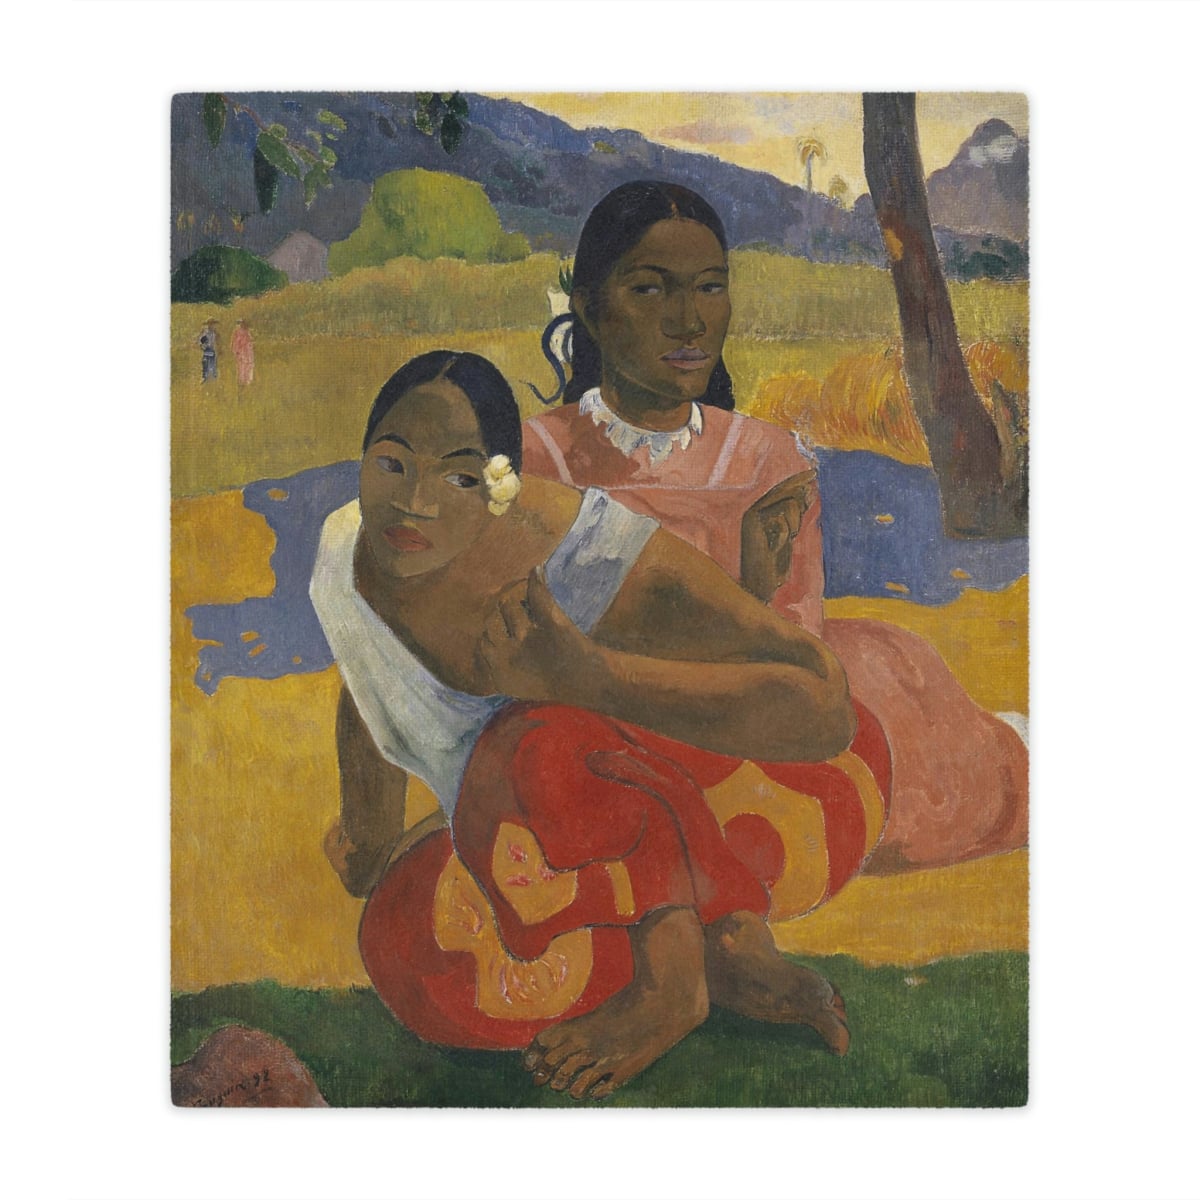 Gauguin Masterpiece Reproduced on Blanket